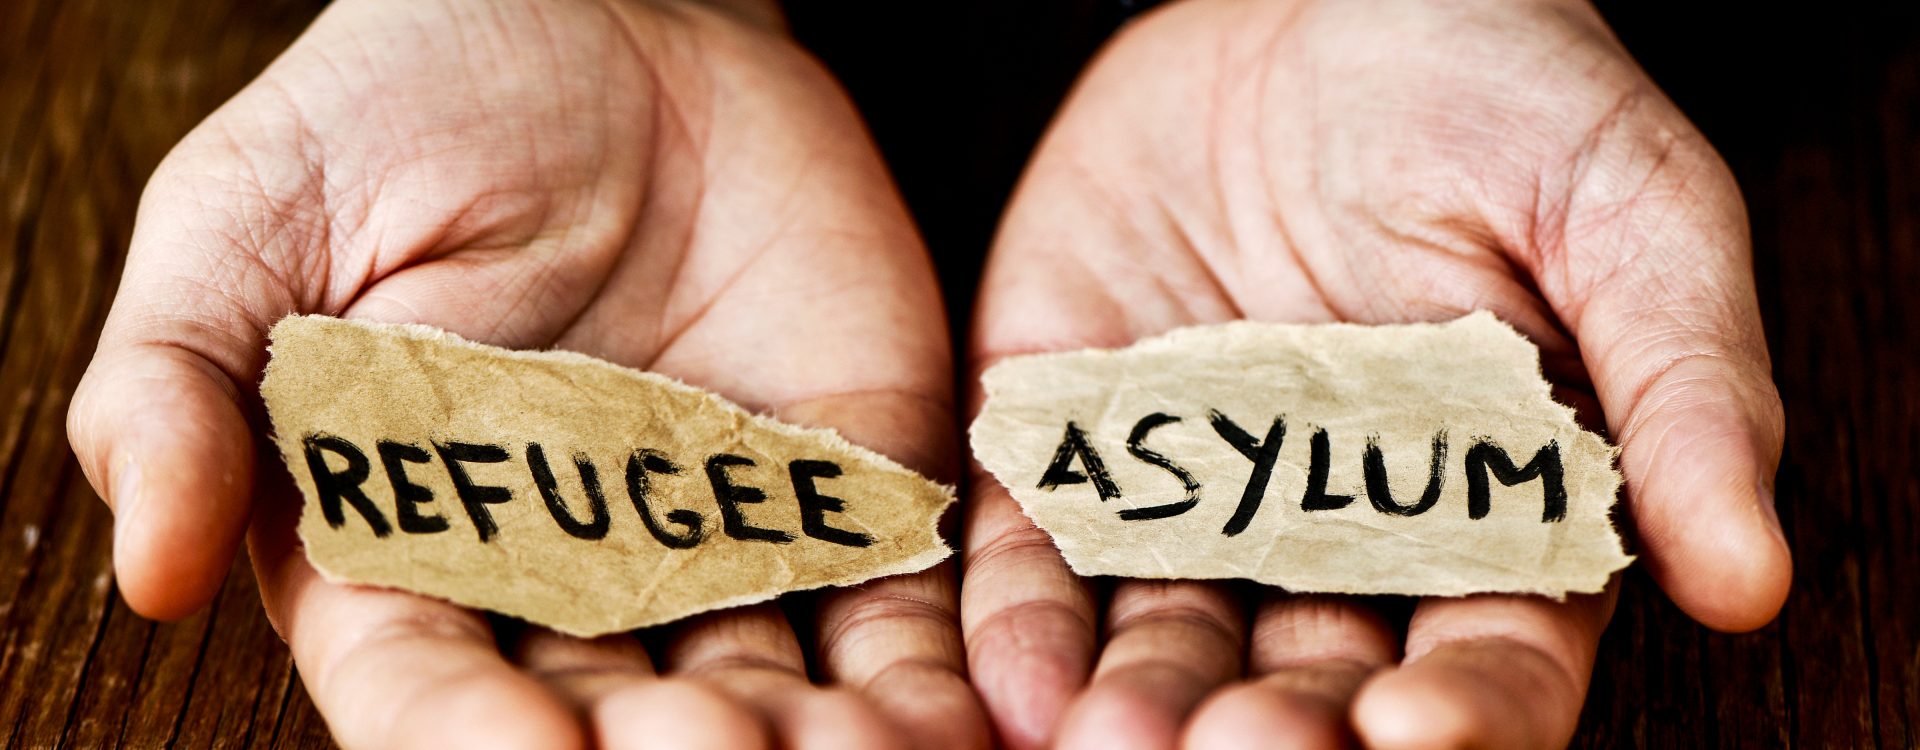 Asylum vs. Refugee: What is the difference?